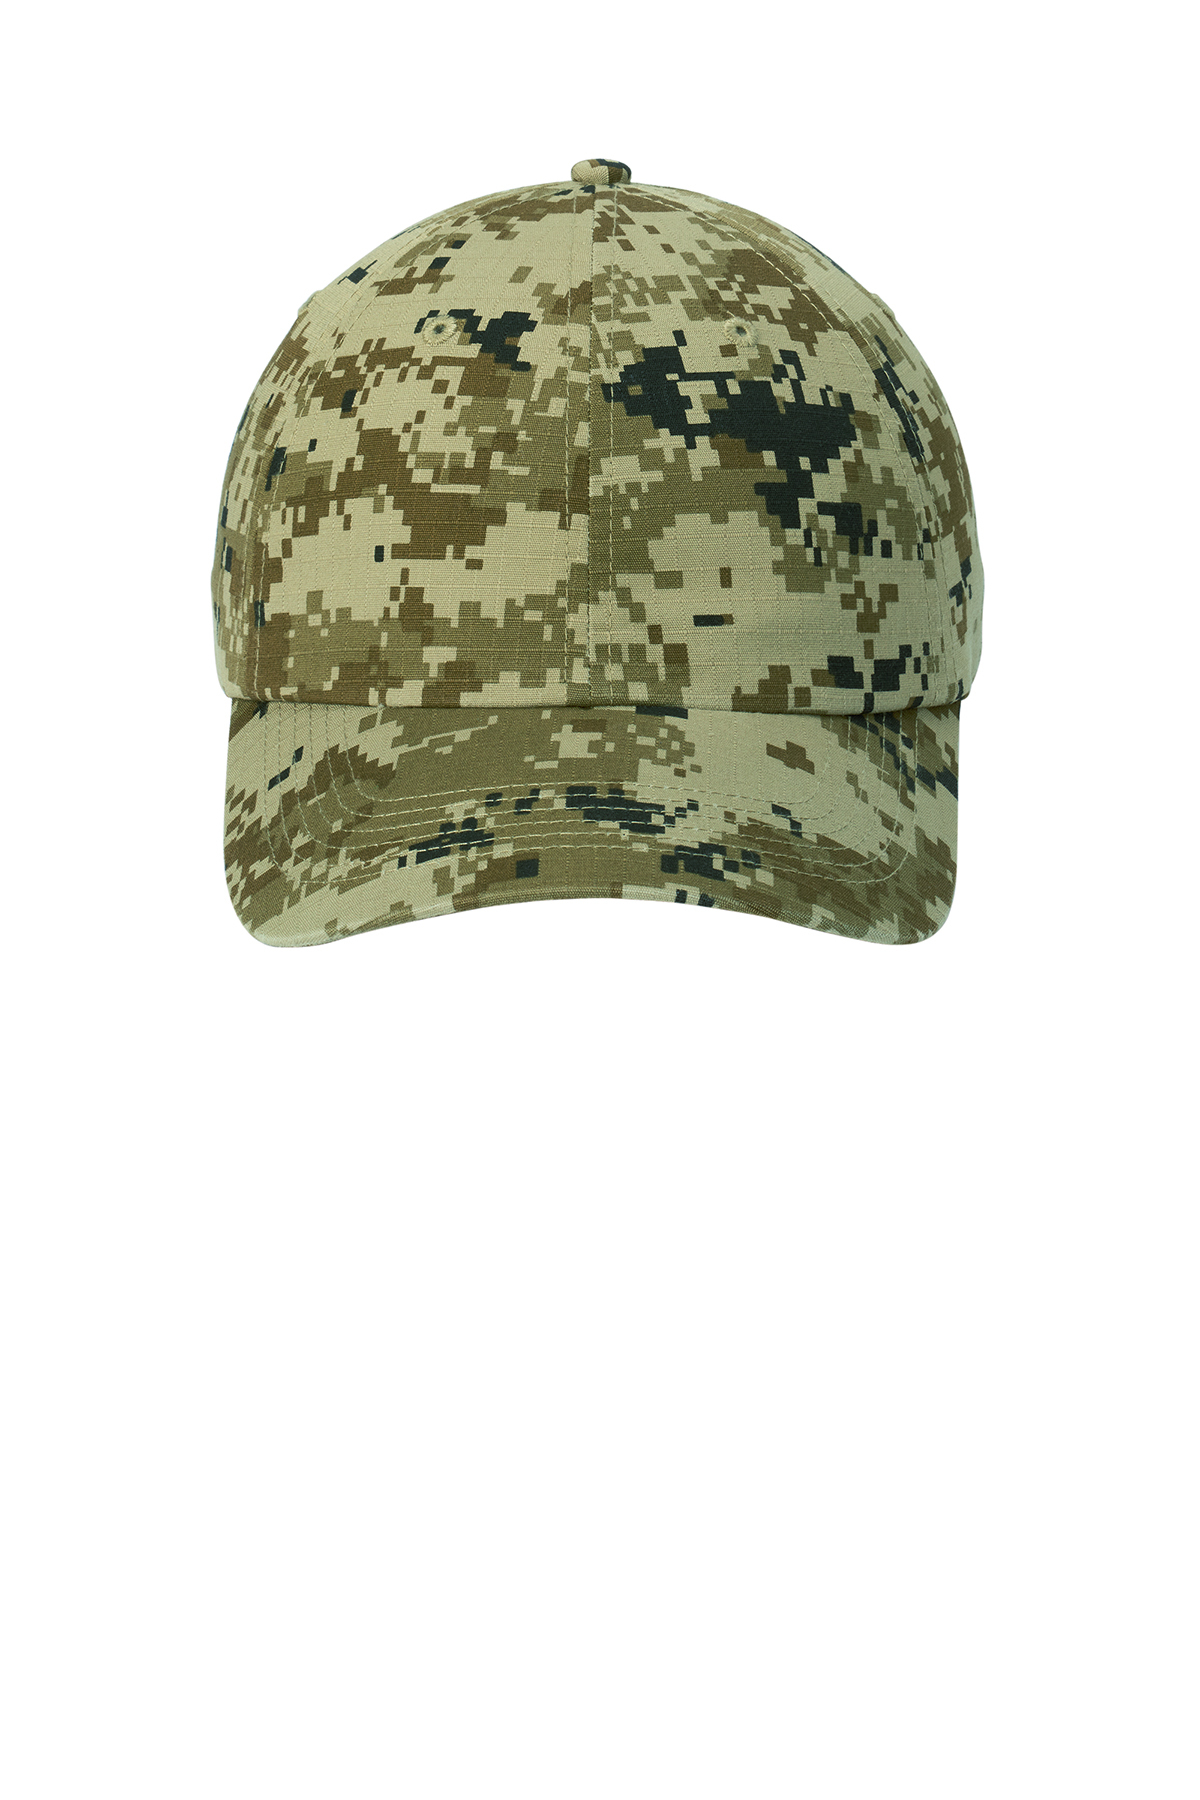 Port Authority Digital Ripstop Camouflage Cap, Product